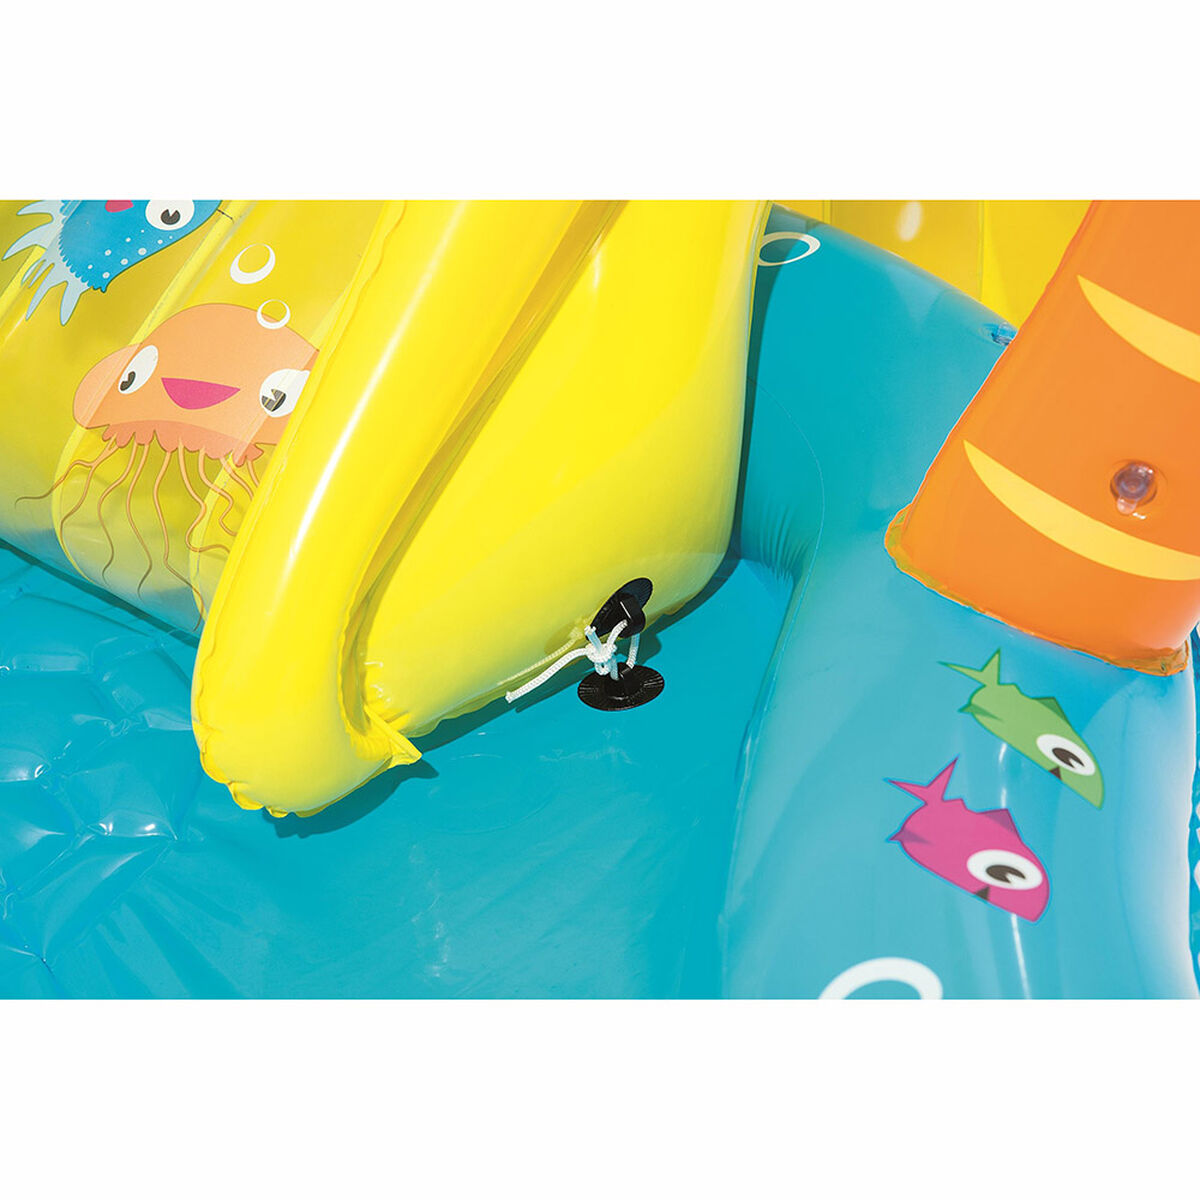 Centro Juego Inflable Bestway Sea Life